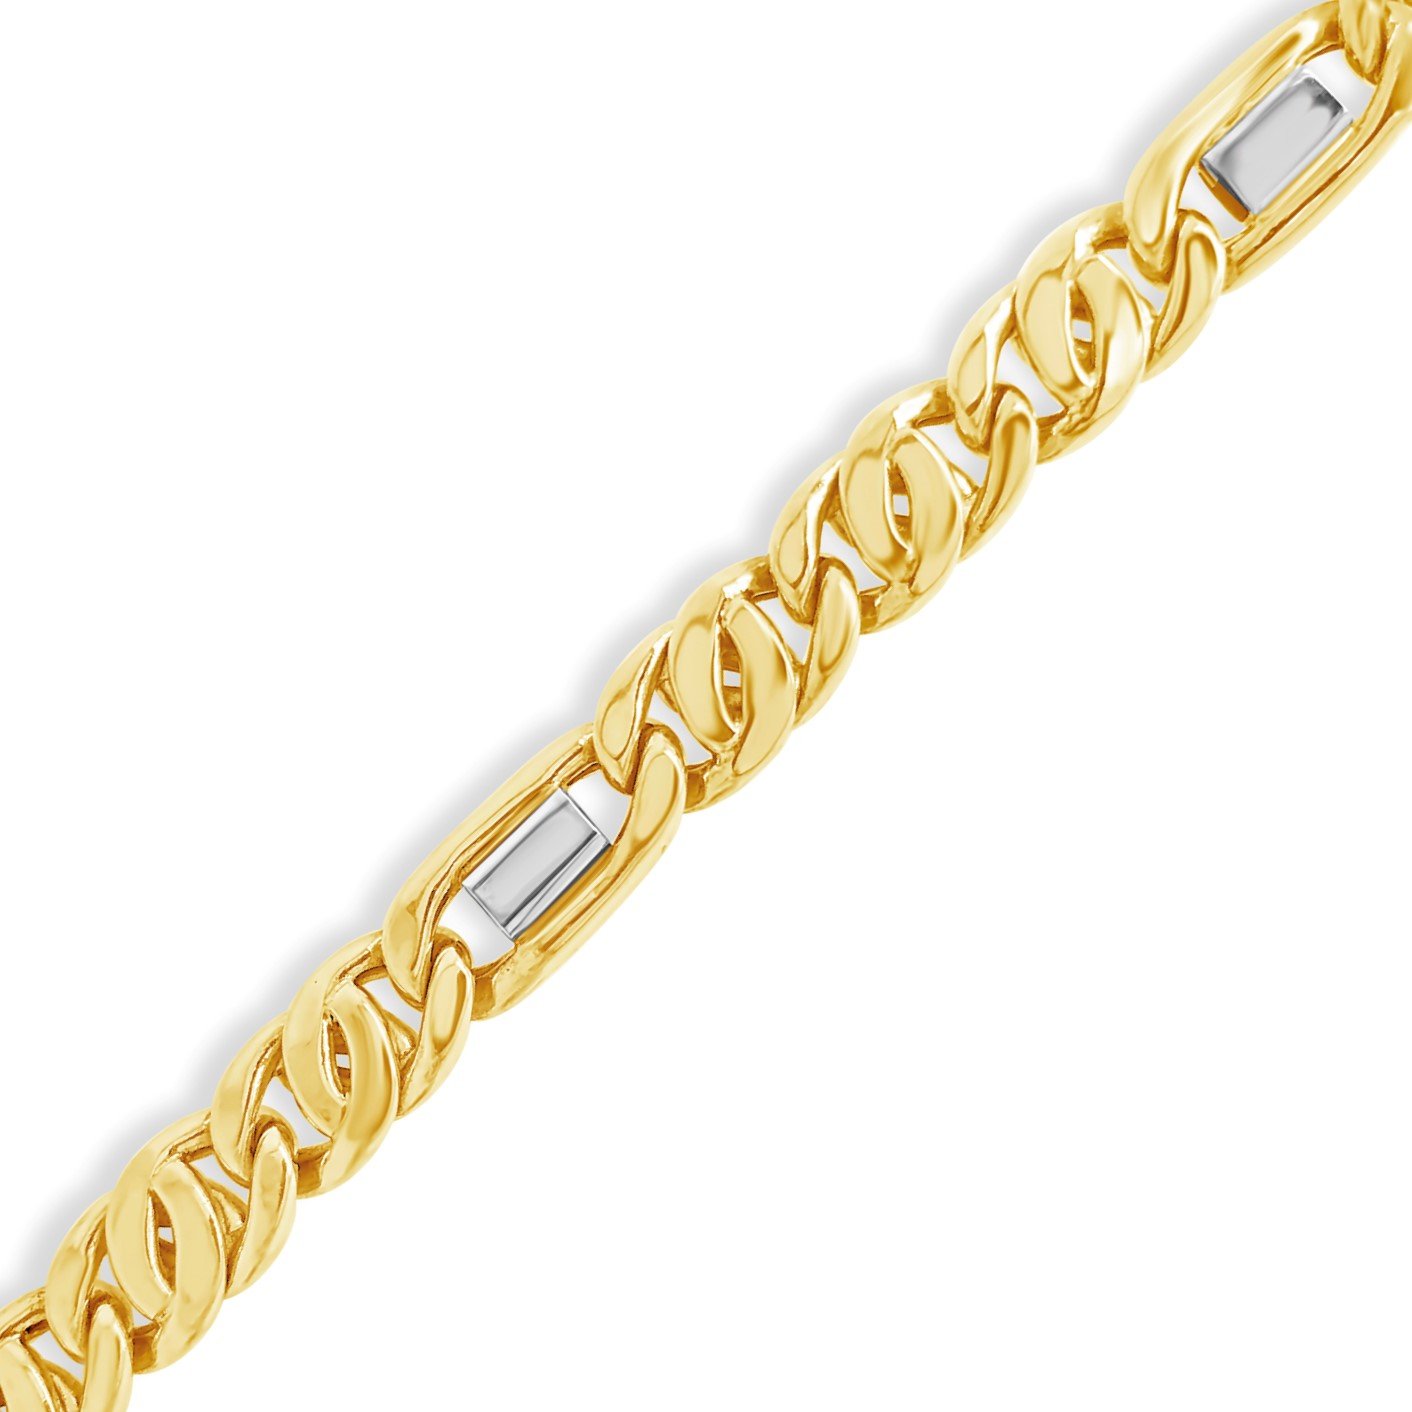 10K Hollow Yellow Gold two Tone Tigers Eye Link Chain